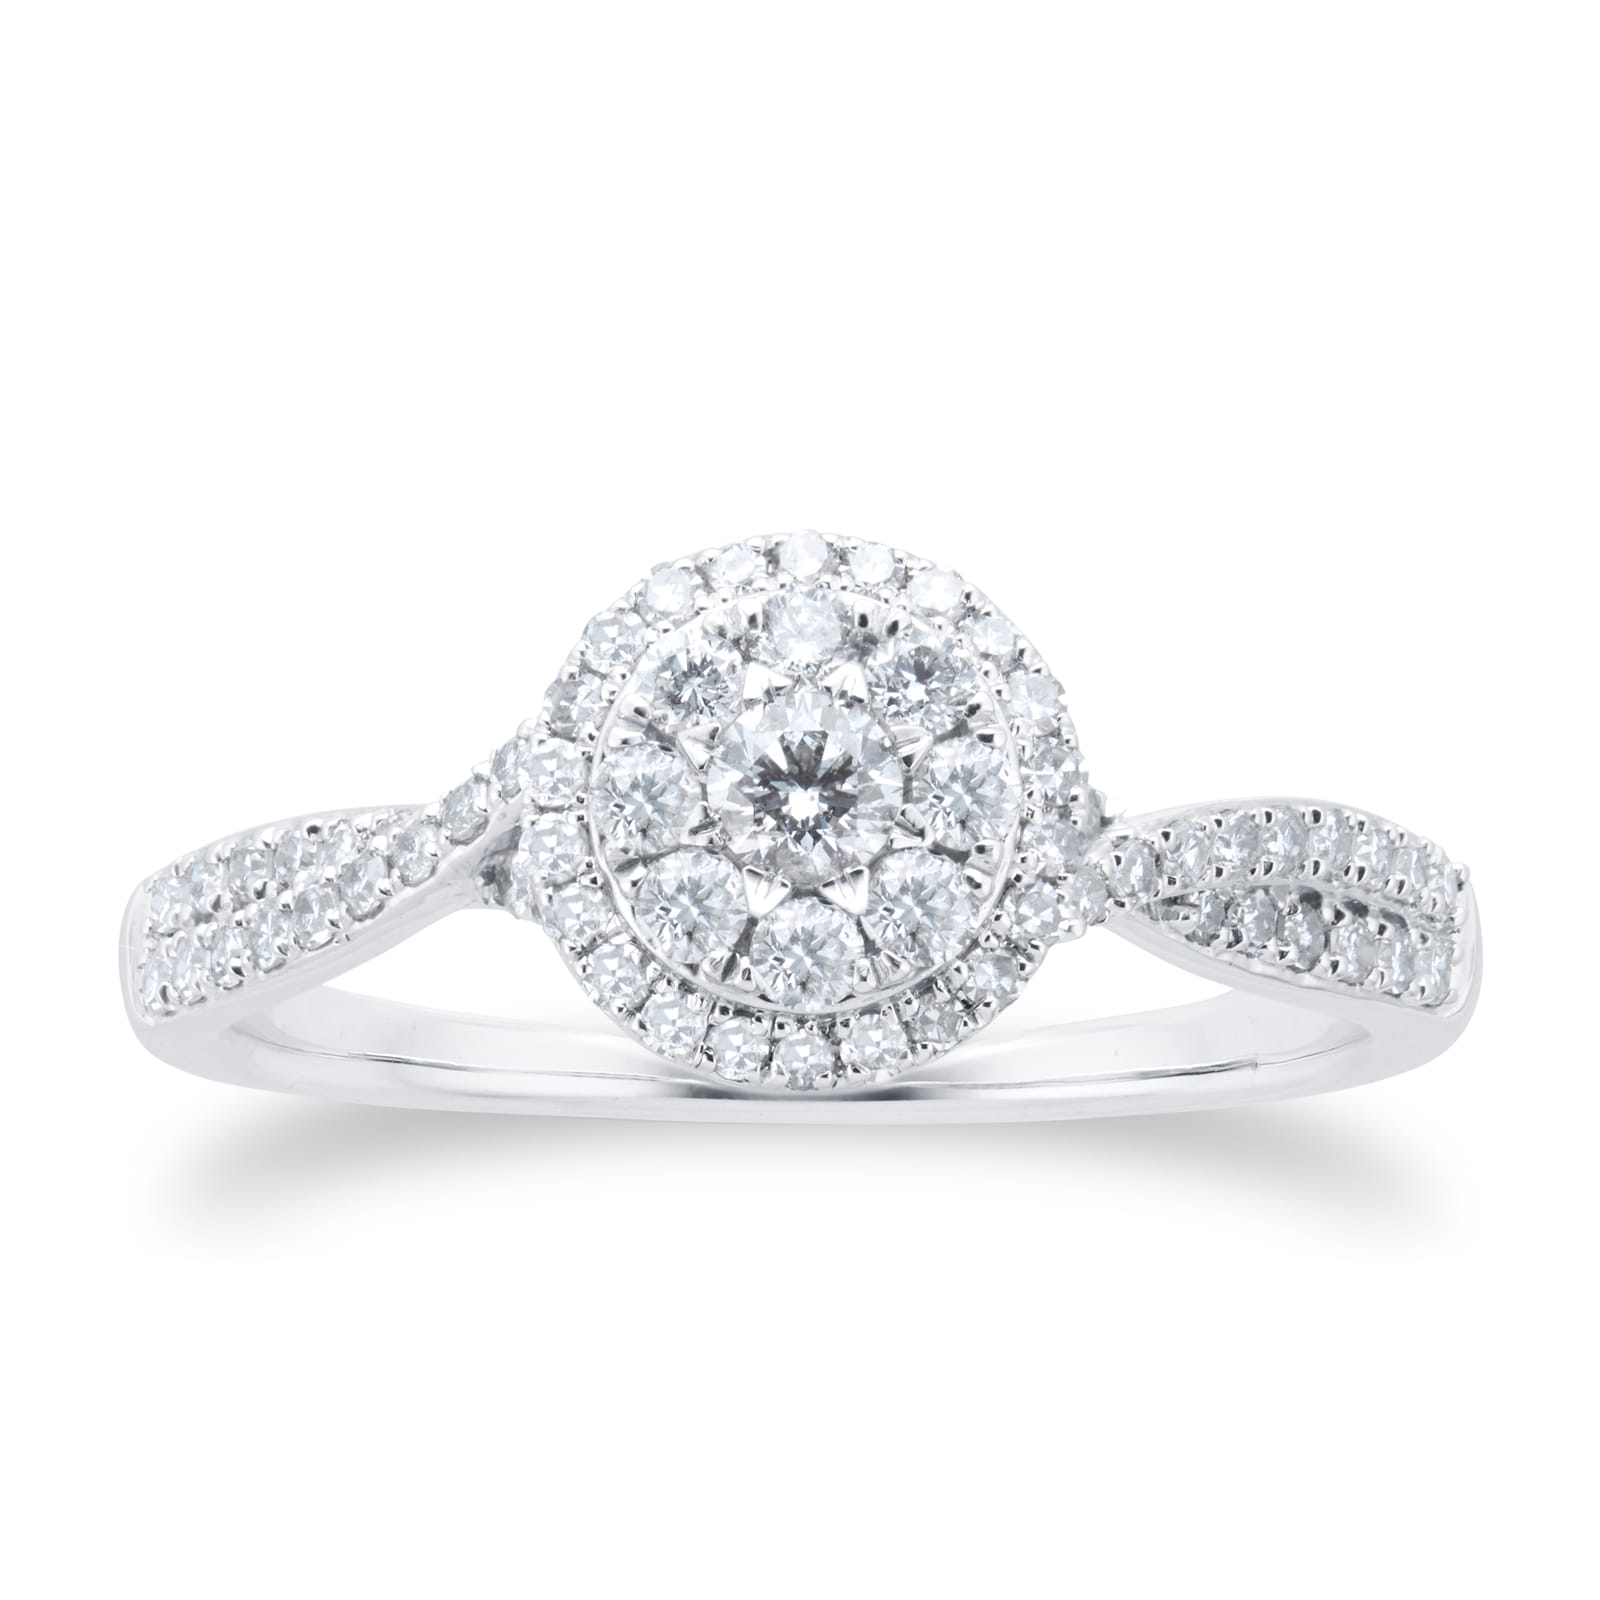 The Orchid Setting 18ct White Gold Halo 0.33ct Diamond Ring at Fraser Hart